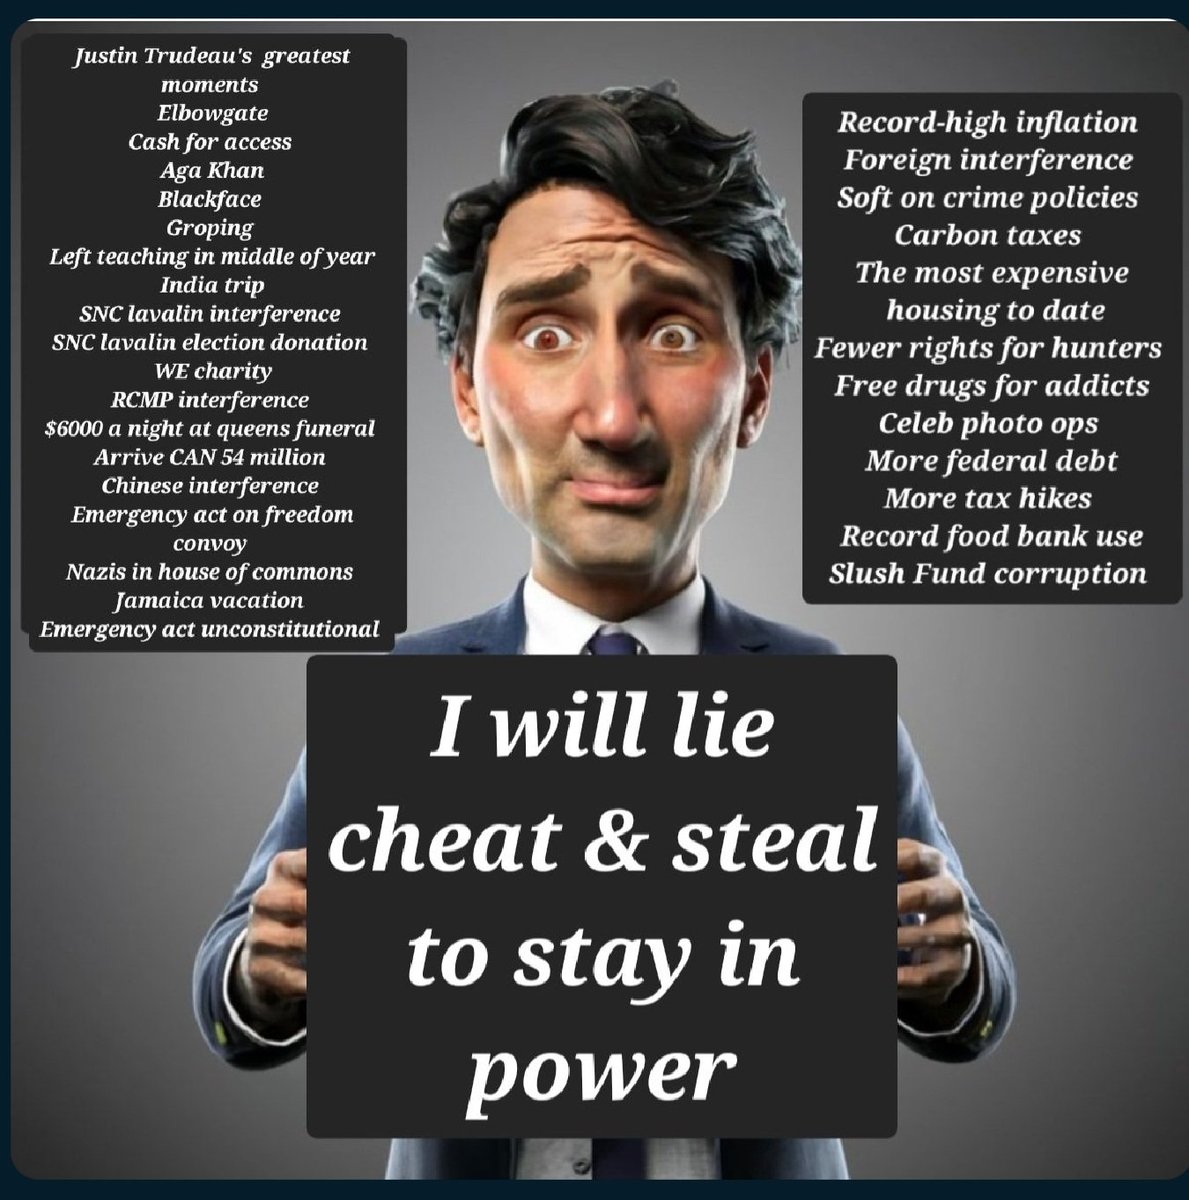 @BillBlair @CWawzonek #CallAnElection 

Canadians DO NOT TRUST LIBERALS. They will lie, cheat and steal to stay in power. Here is a short list of what they have accomplish in the last 9 years. 

Terrible, terrible, terrible what the LIBERALS HAVE DONE TO Canadians.